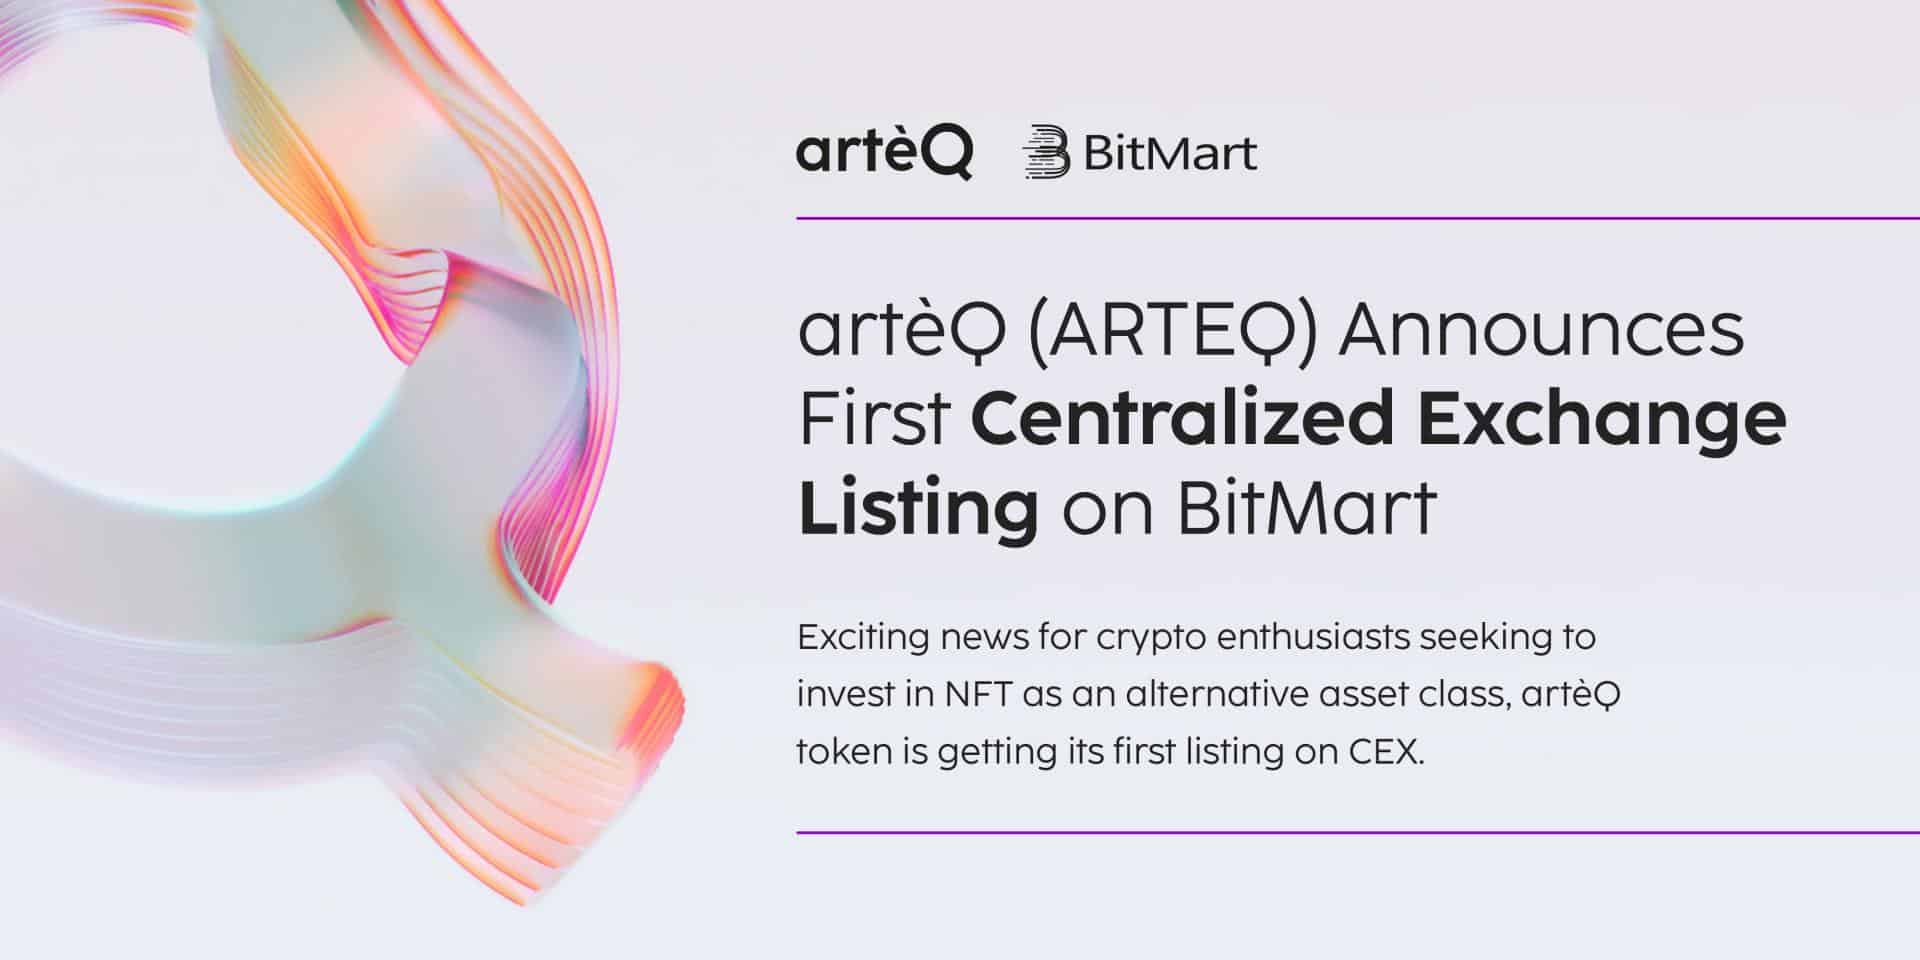 ARTEQ Announces First Centralized Exchange Listing on BitMart